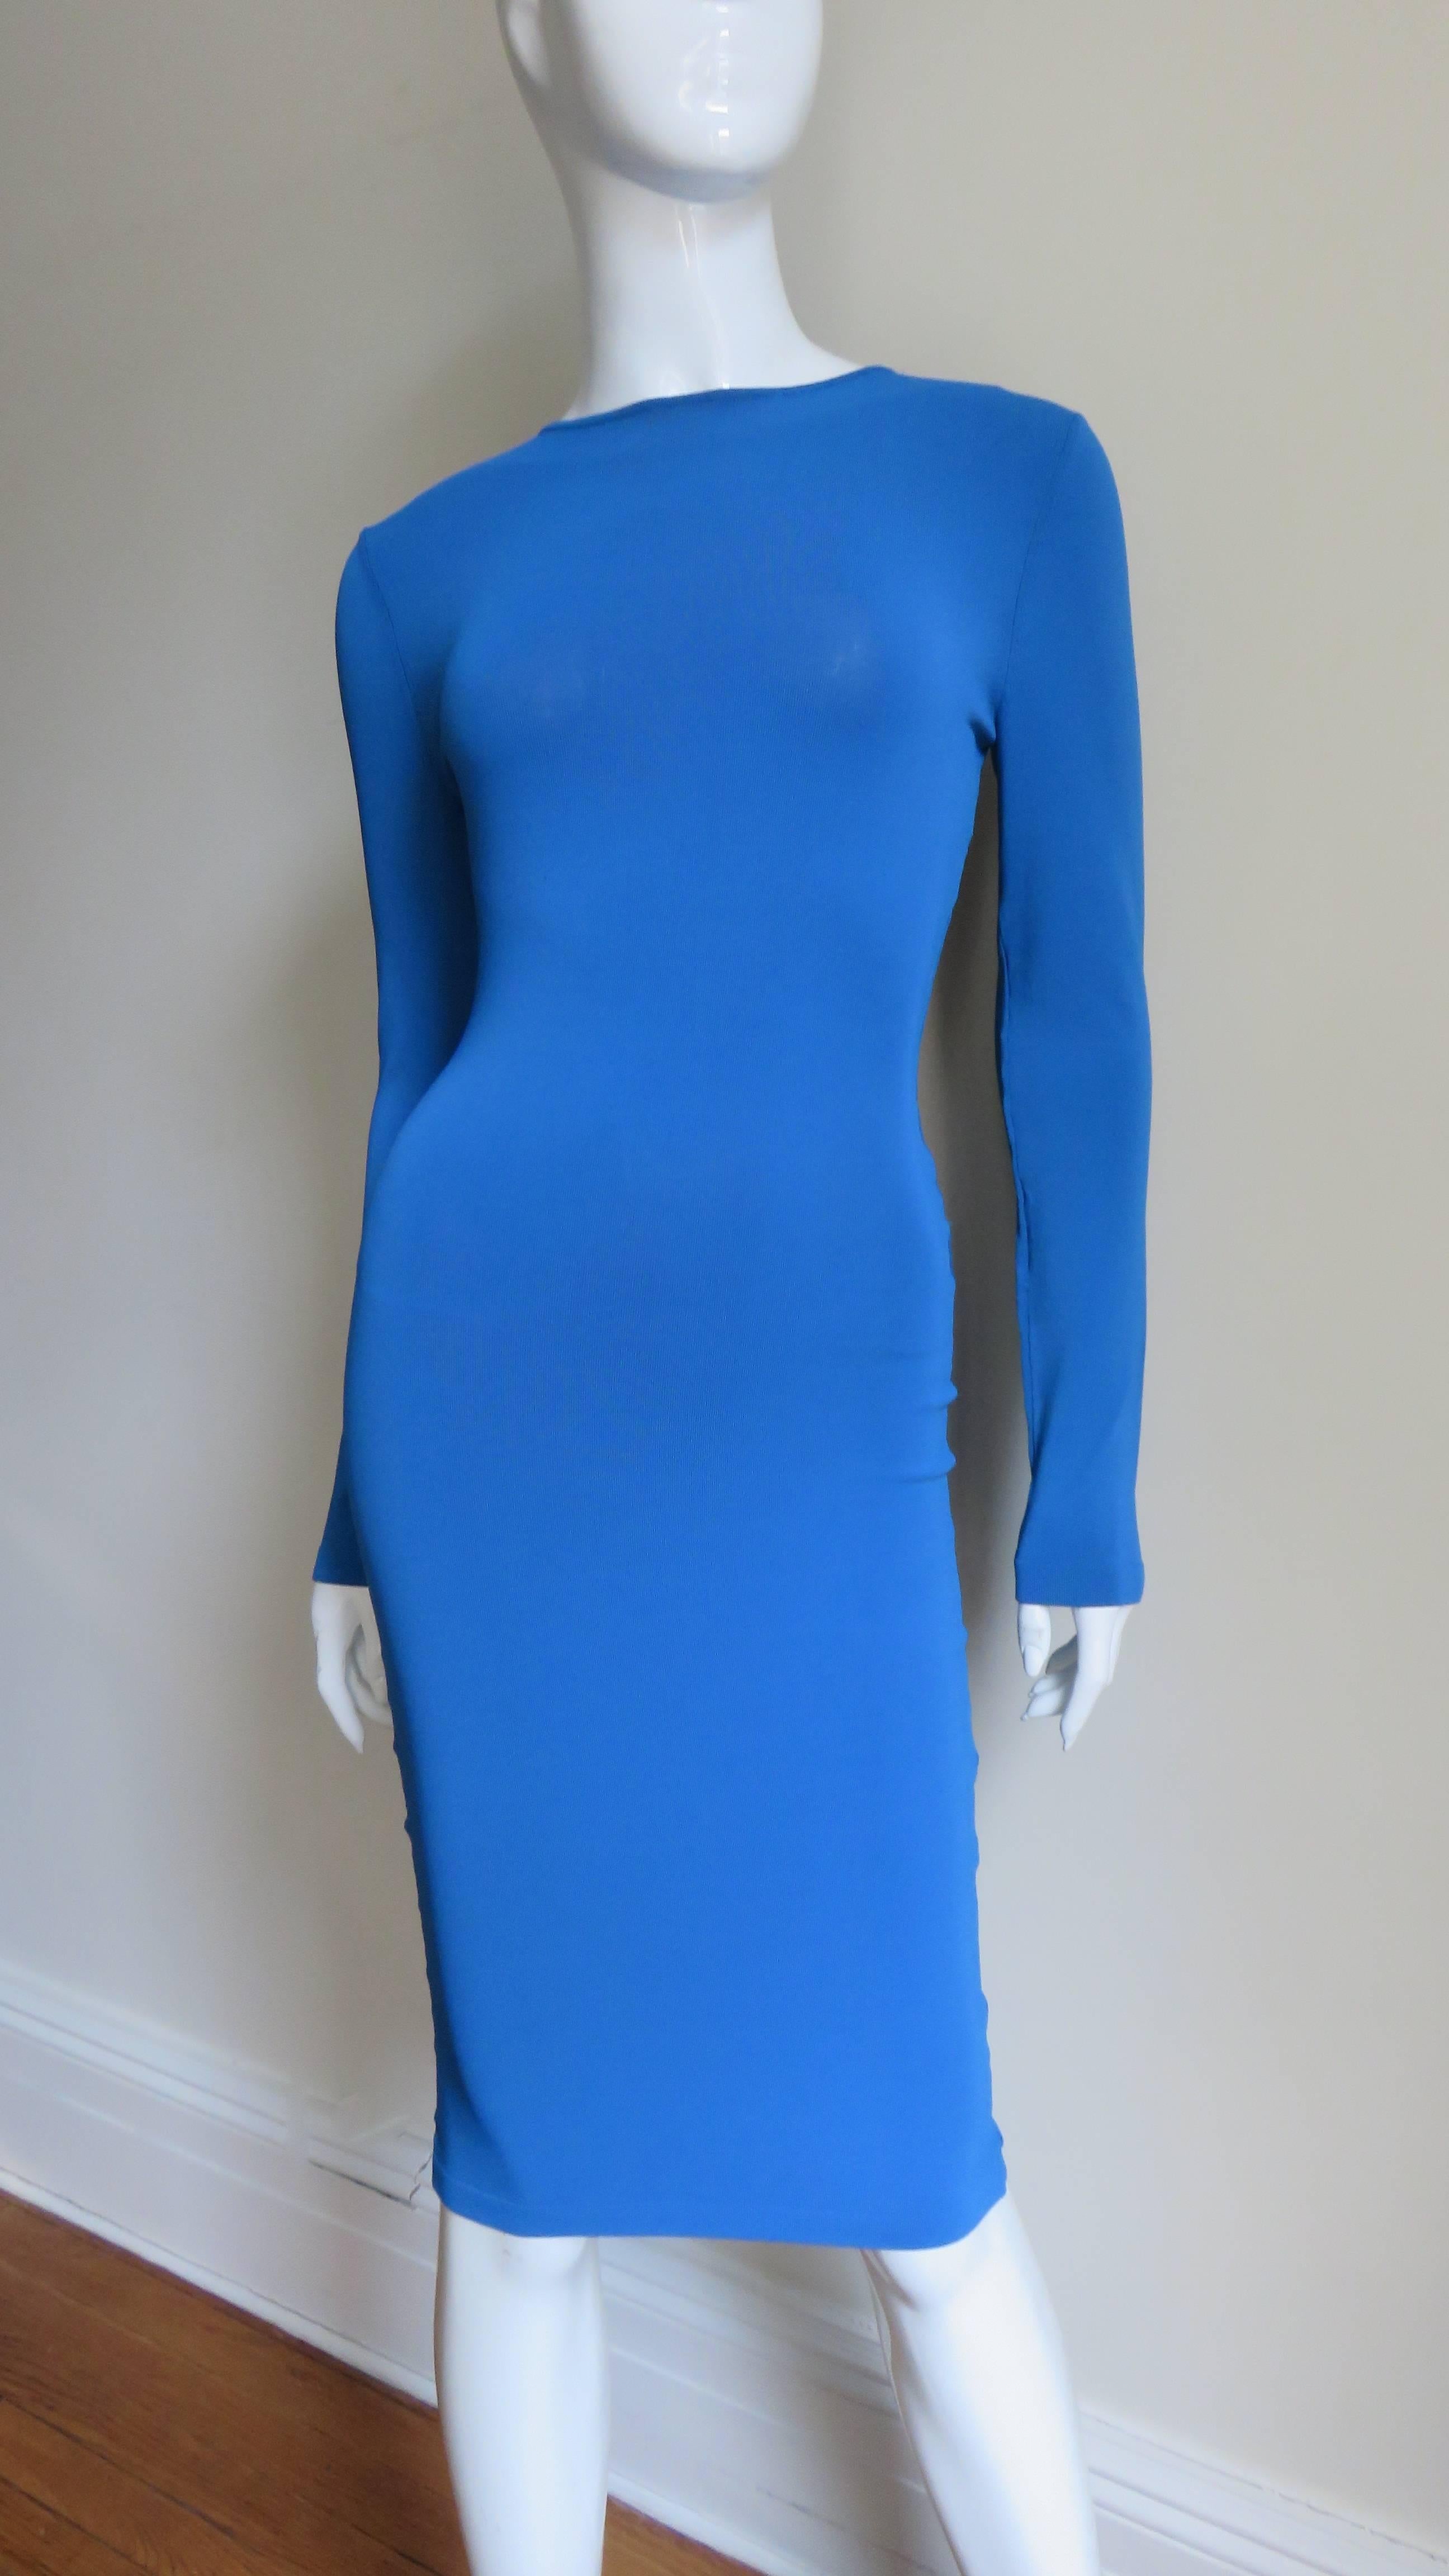 A fabulous bright turquoise blue jersey body conscious dress from Alexander McQueen. It is fitted with long sleeves and an amazing deep cutout back draped with fine silver chains it's length.  It is unlined with the exception of the mesh under the